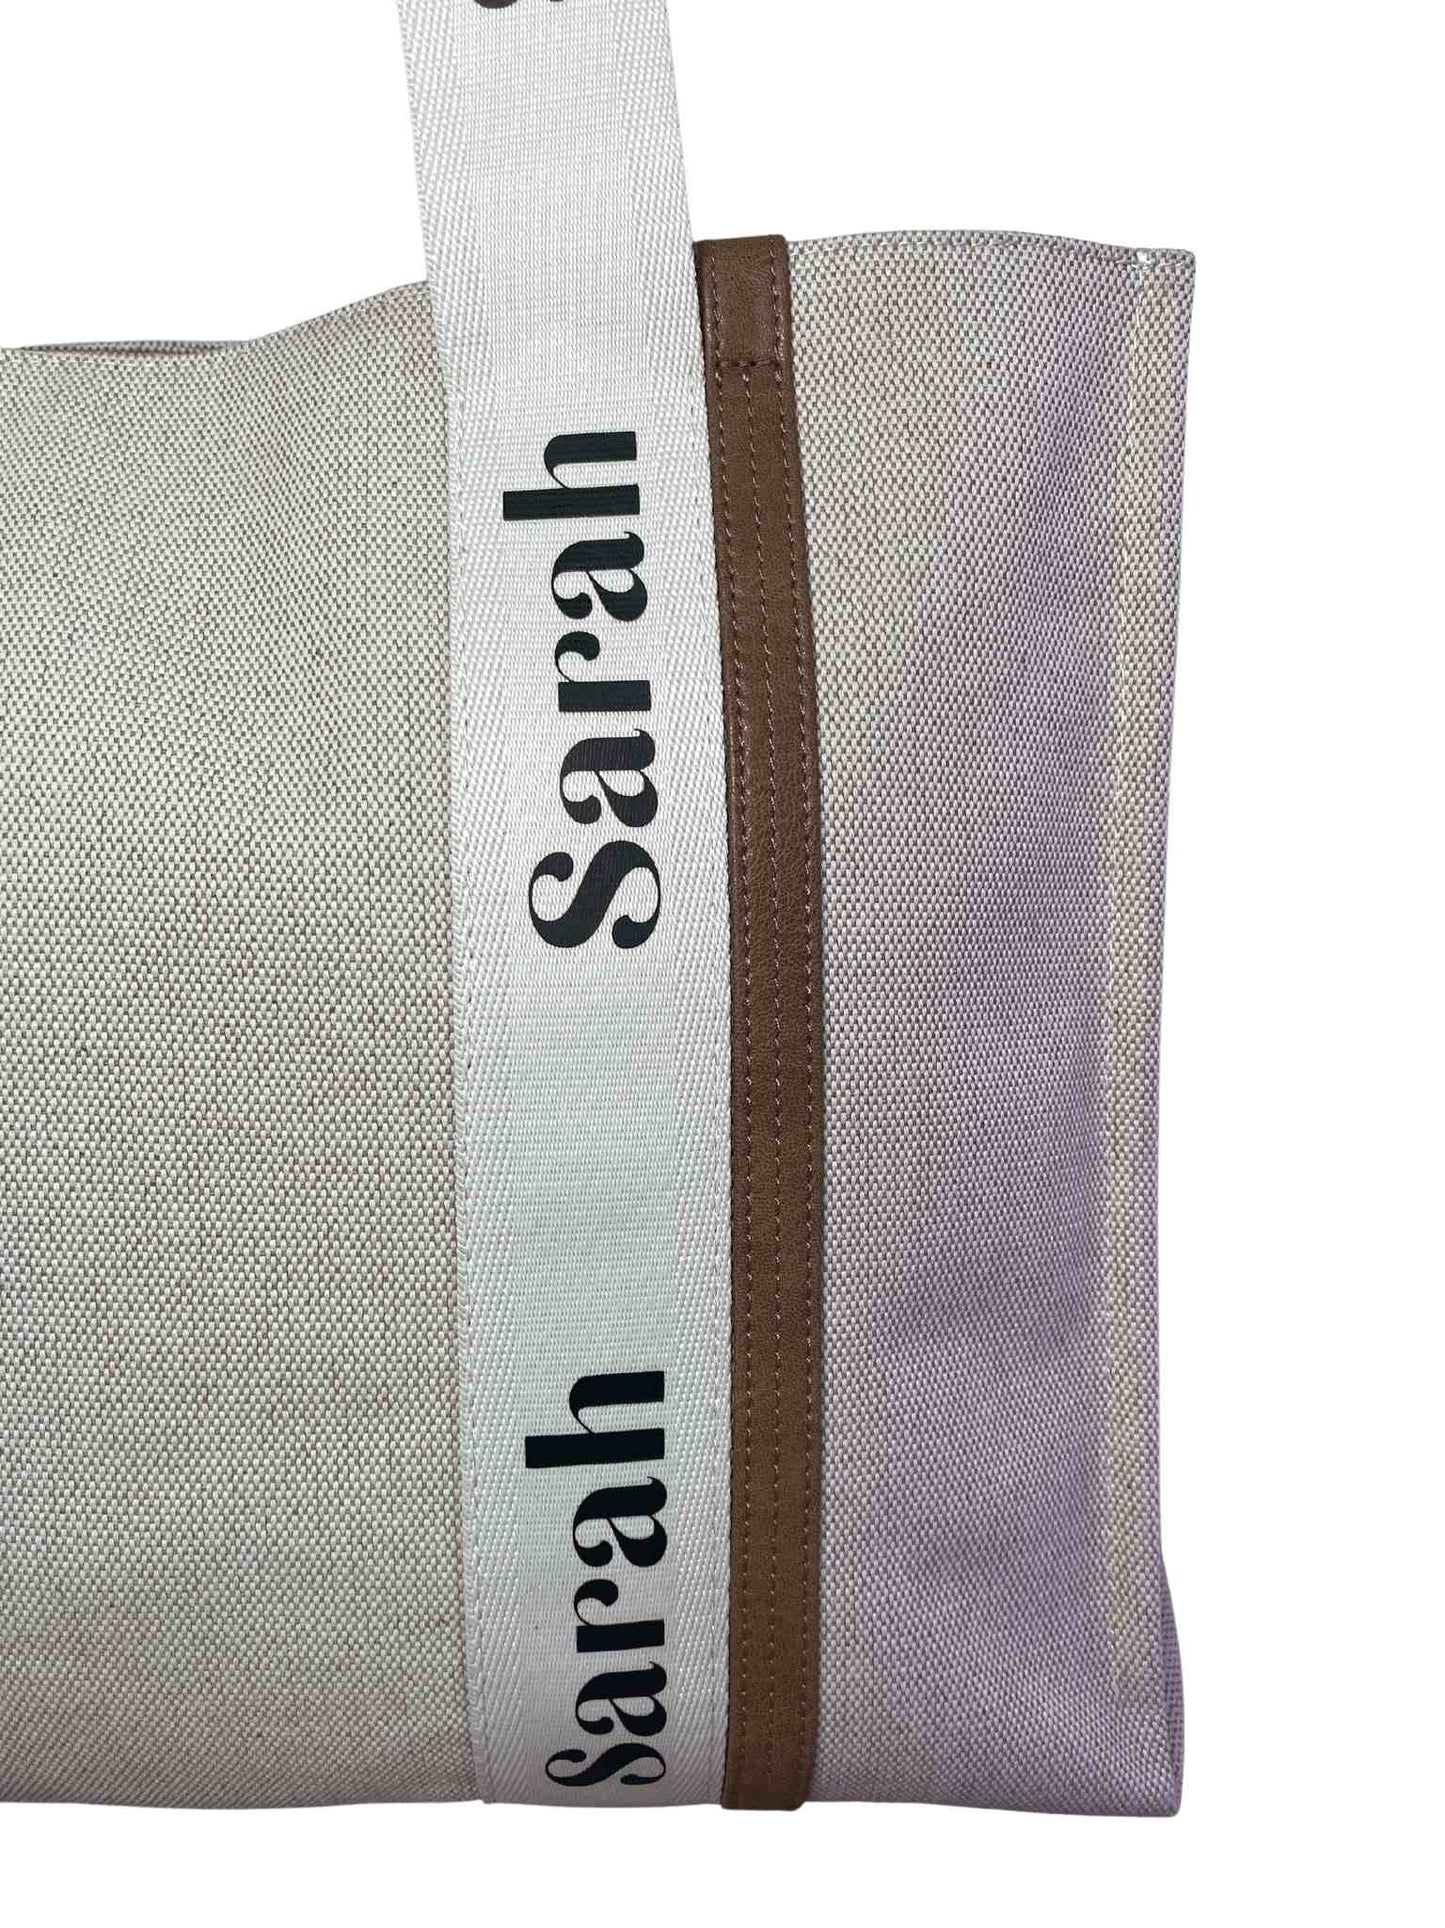 Personalised name imprinted on the ribbon across the main body of the bag